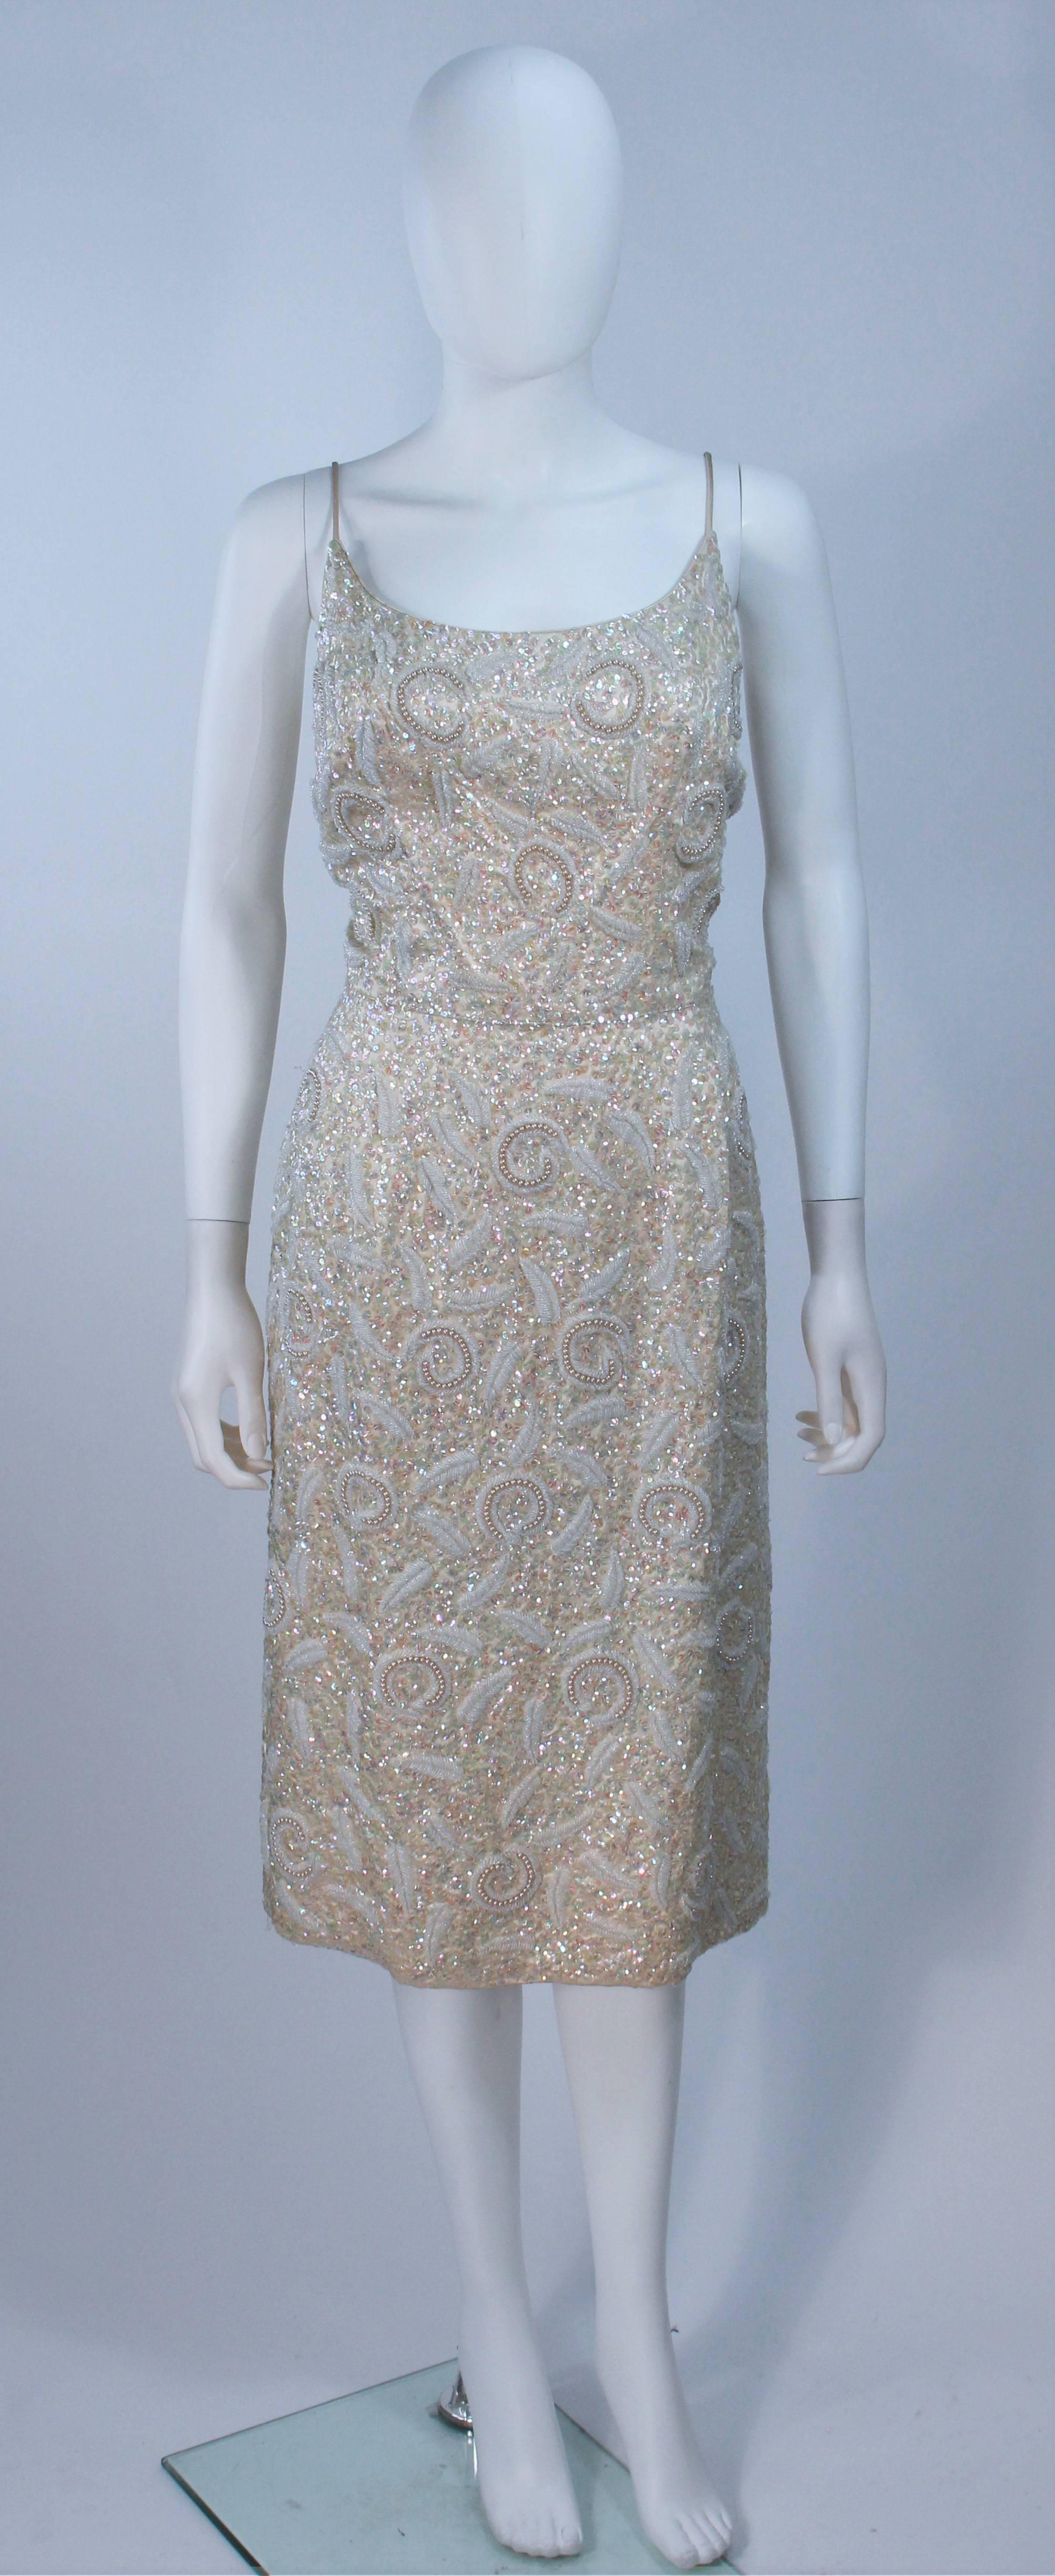  This cocktail dress is composed of an off white silk and is embellished with iridescent sequins. The  spaghetti strap design features a center back zipper closure. In excellent vintage condition with original tags. 

  **Please cross-reference